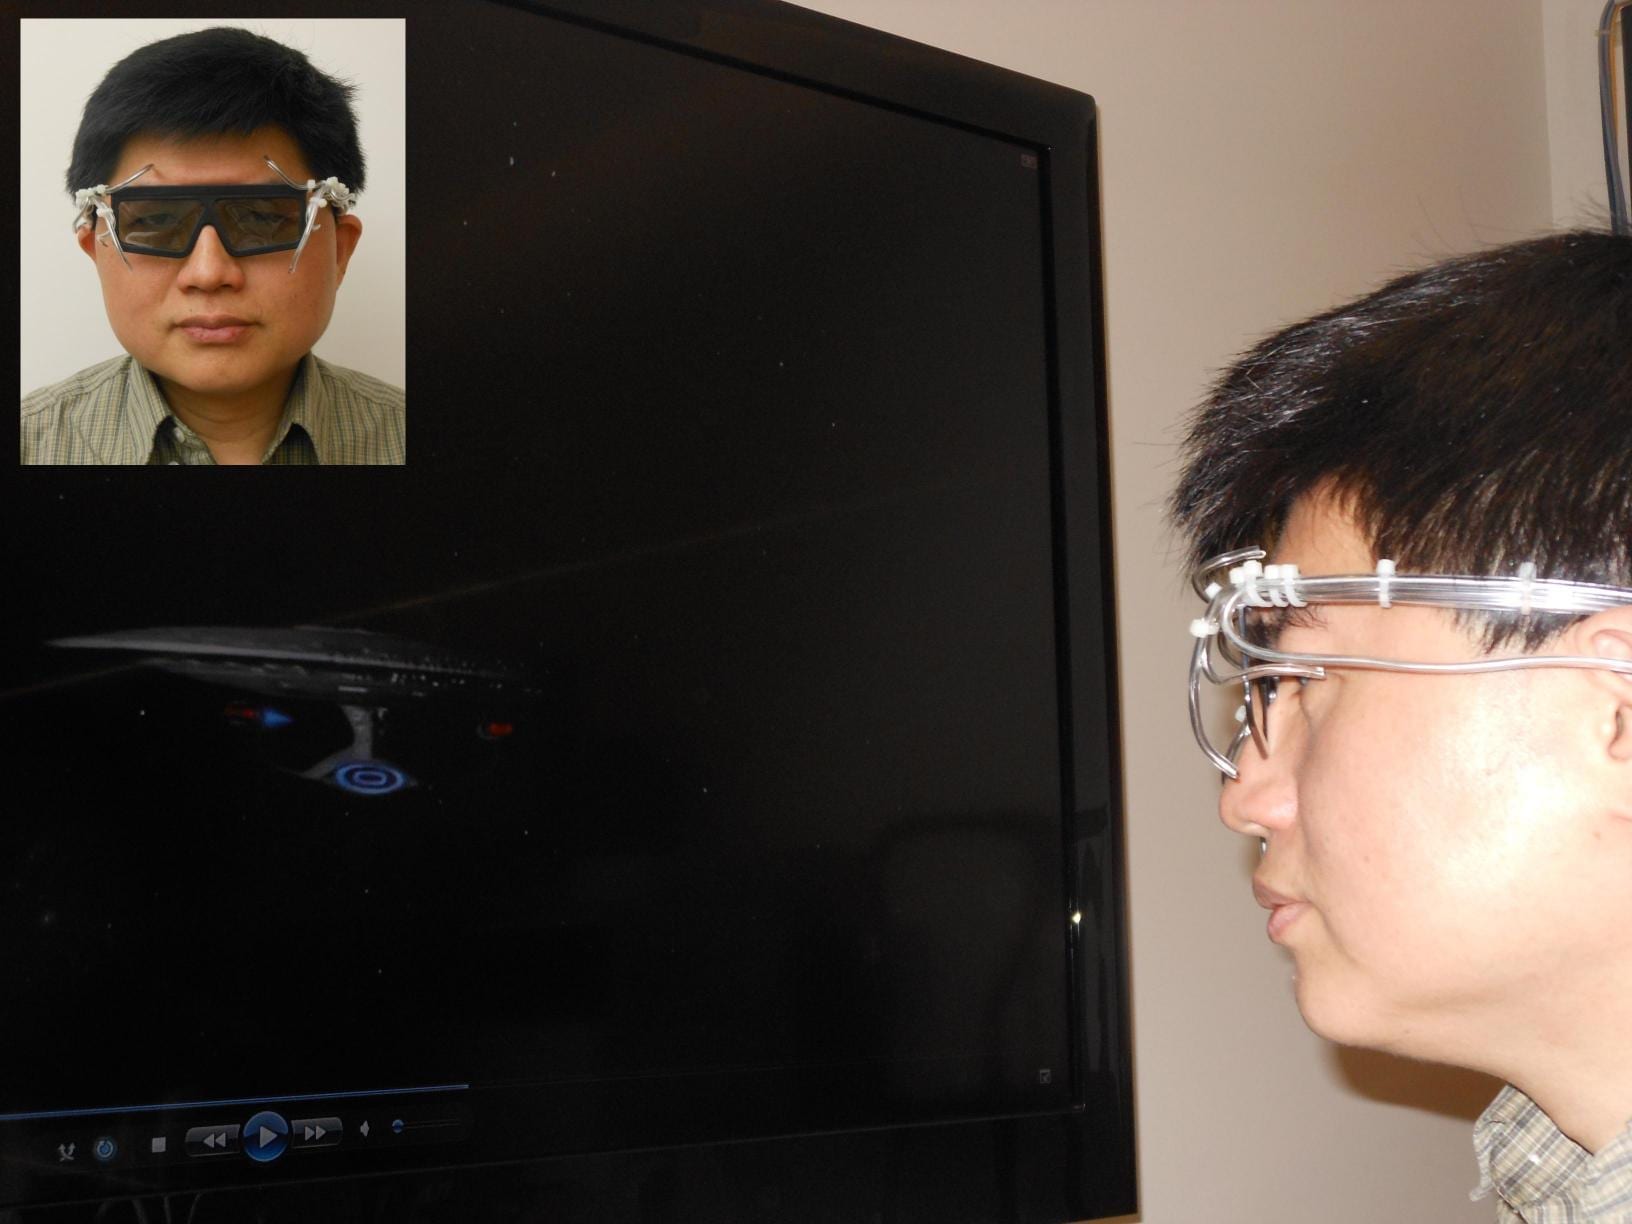 4-D goggles that allows wearers to be physically “touched” by a movie